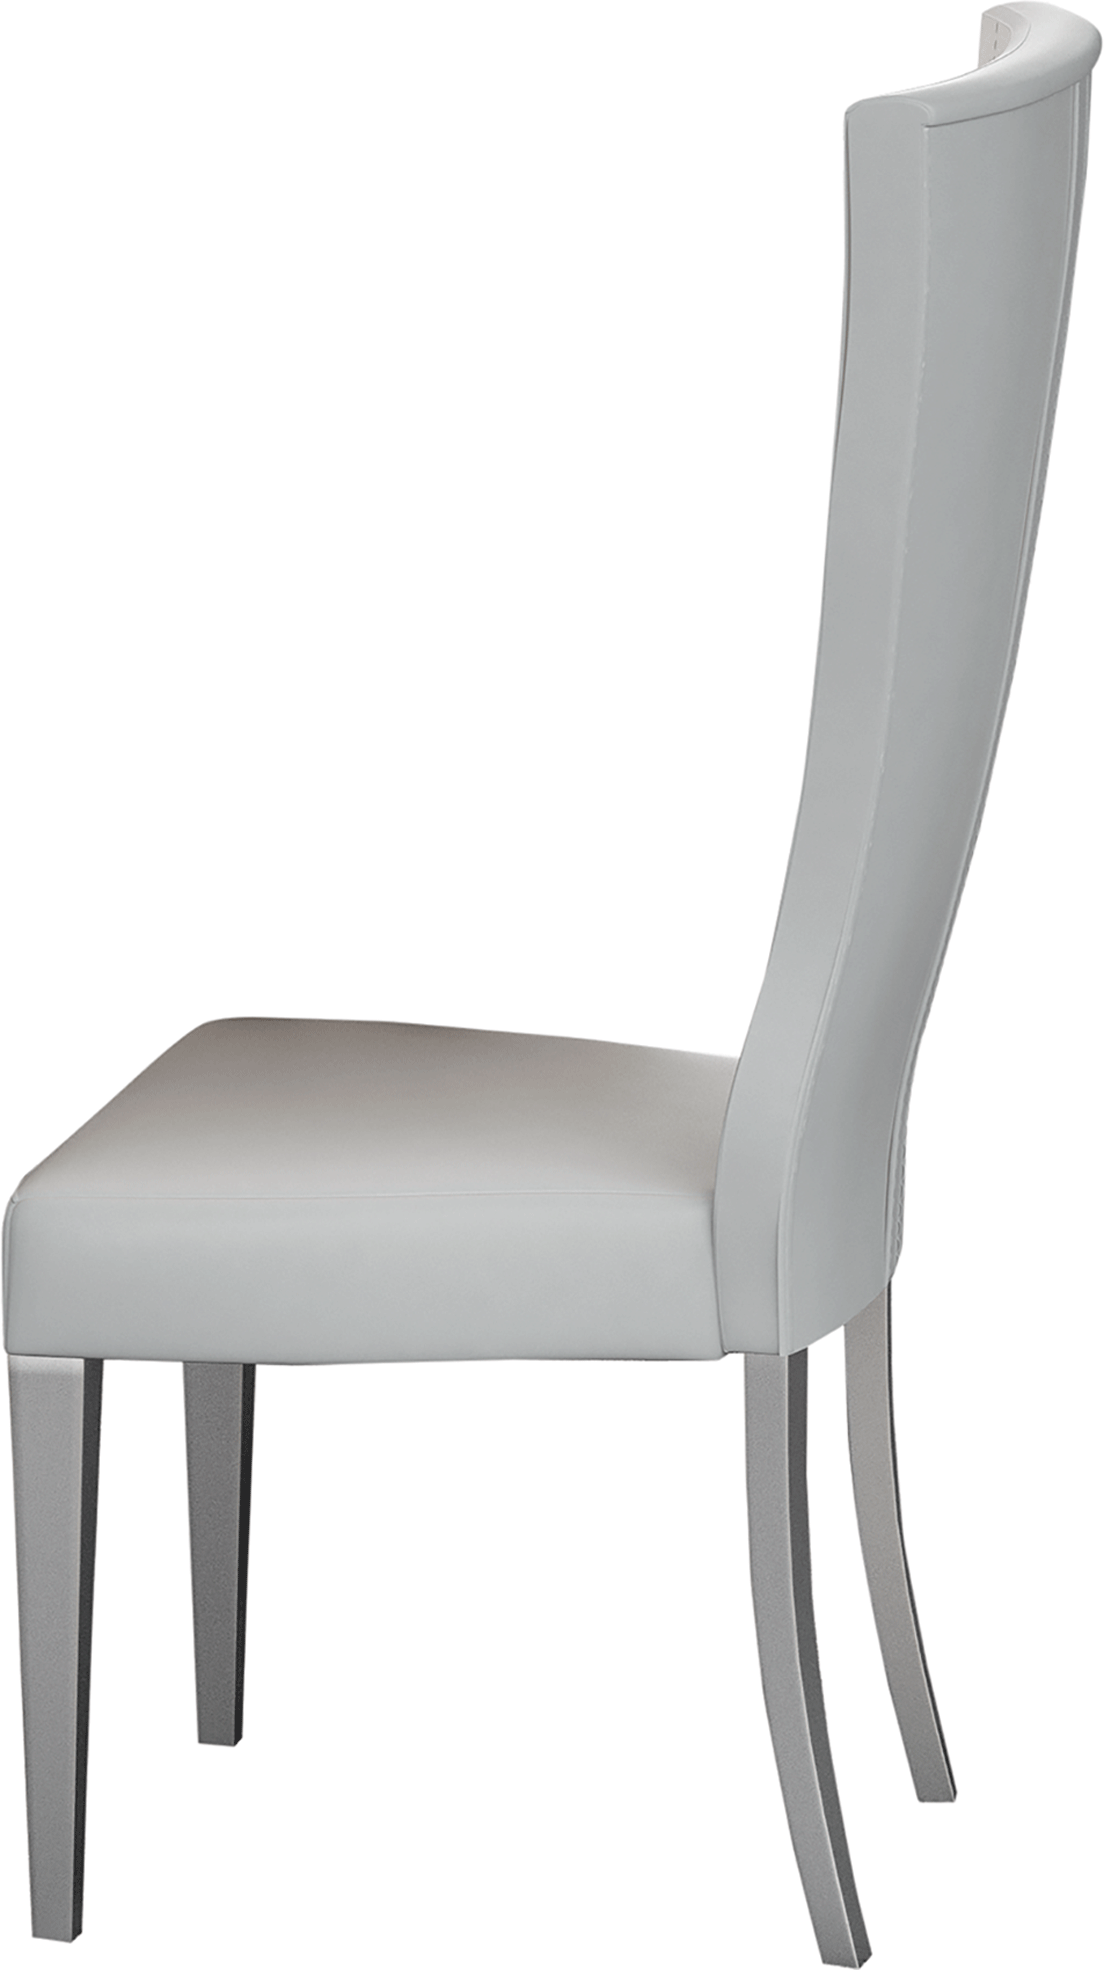 Brands Franco ENZO Dining and Wall Units, Spain Kiu Side Chair